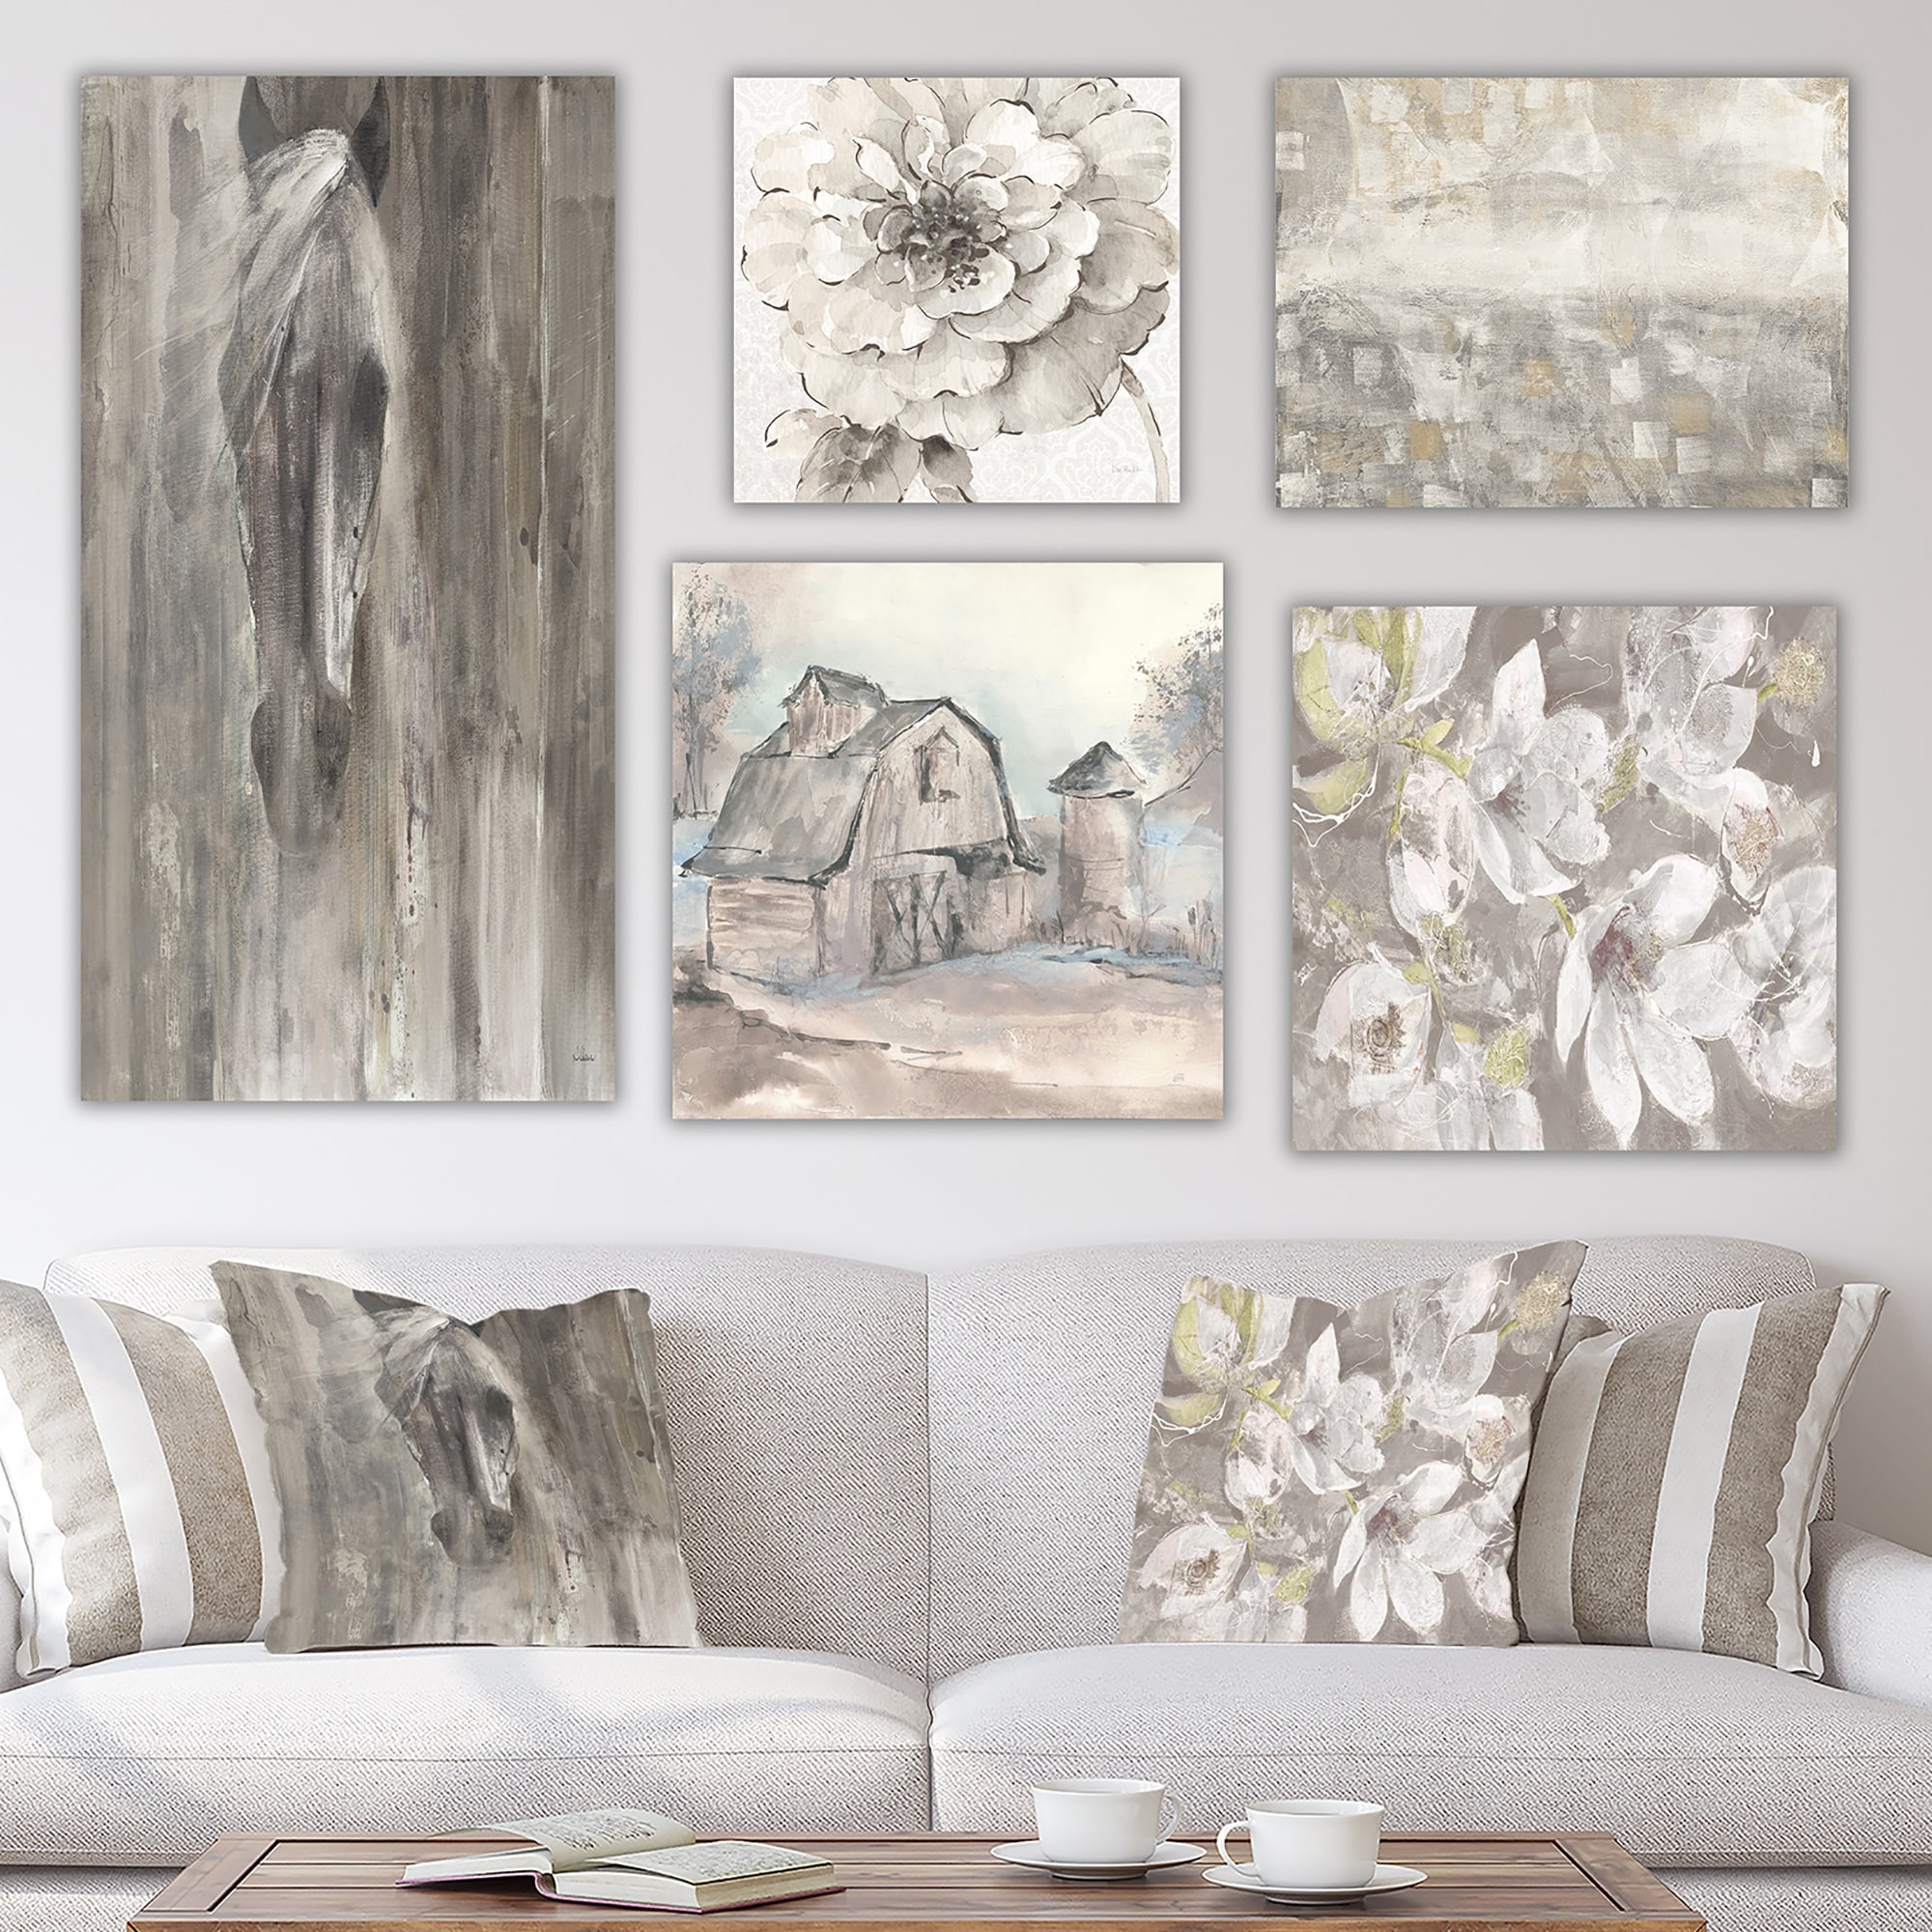 14+ Most Farmhouse wall art images information